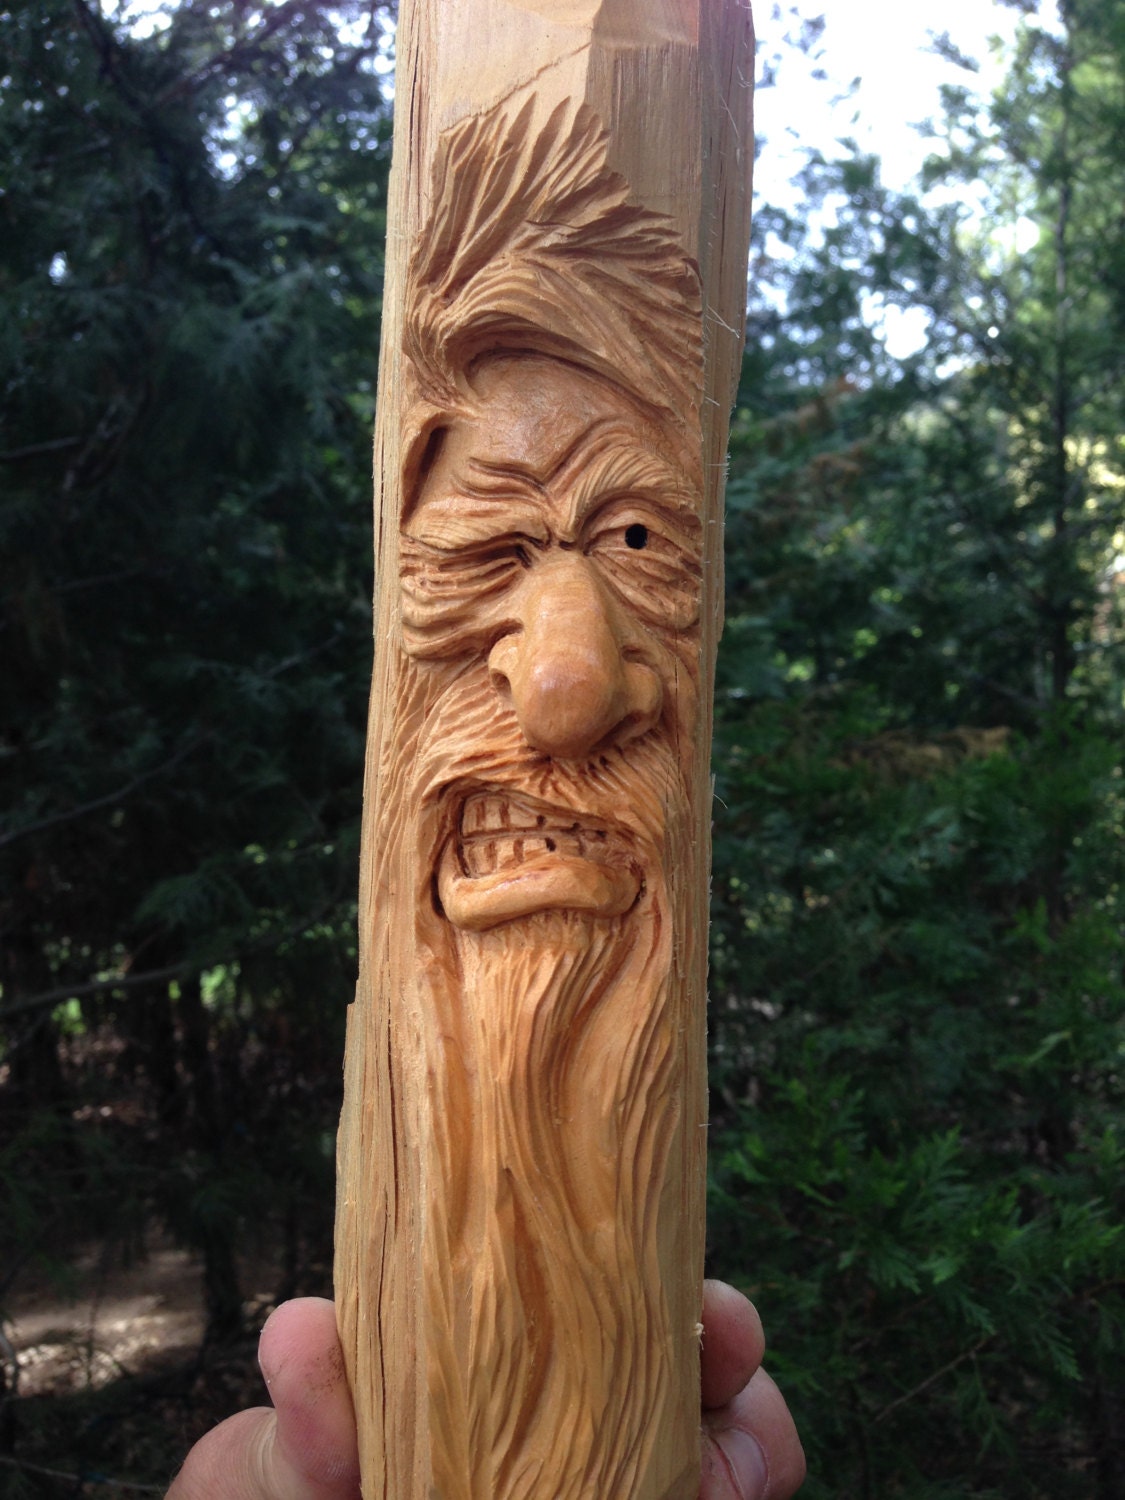 HAND CARVED Angry Winking Viking Wizard Wood Spirit Carving